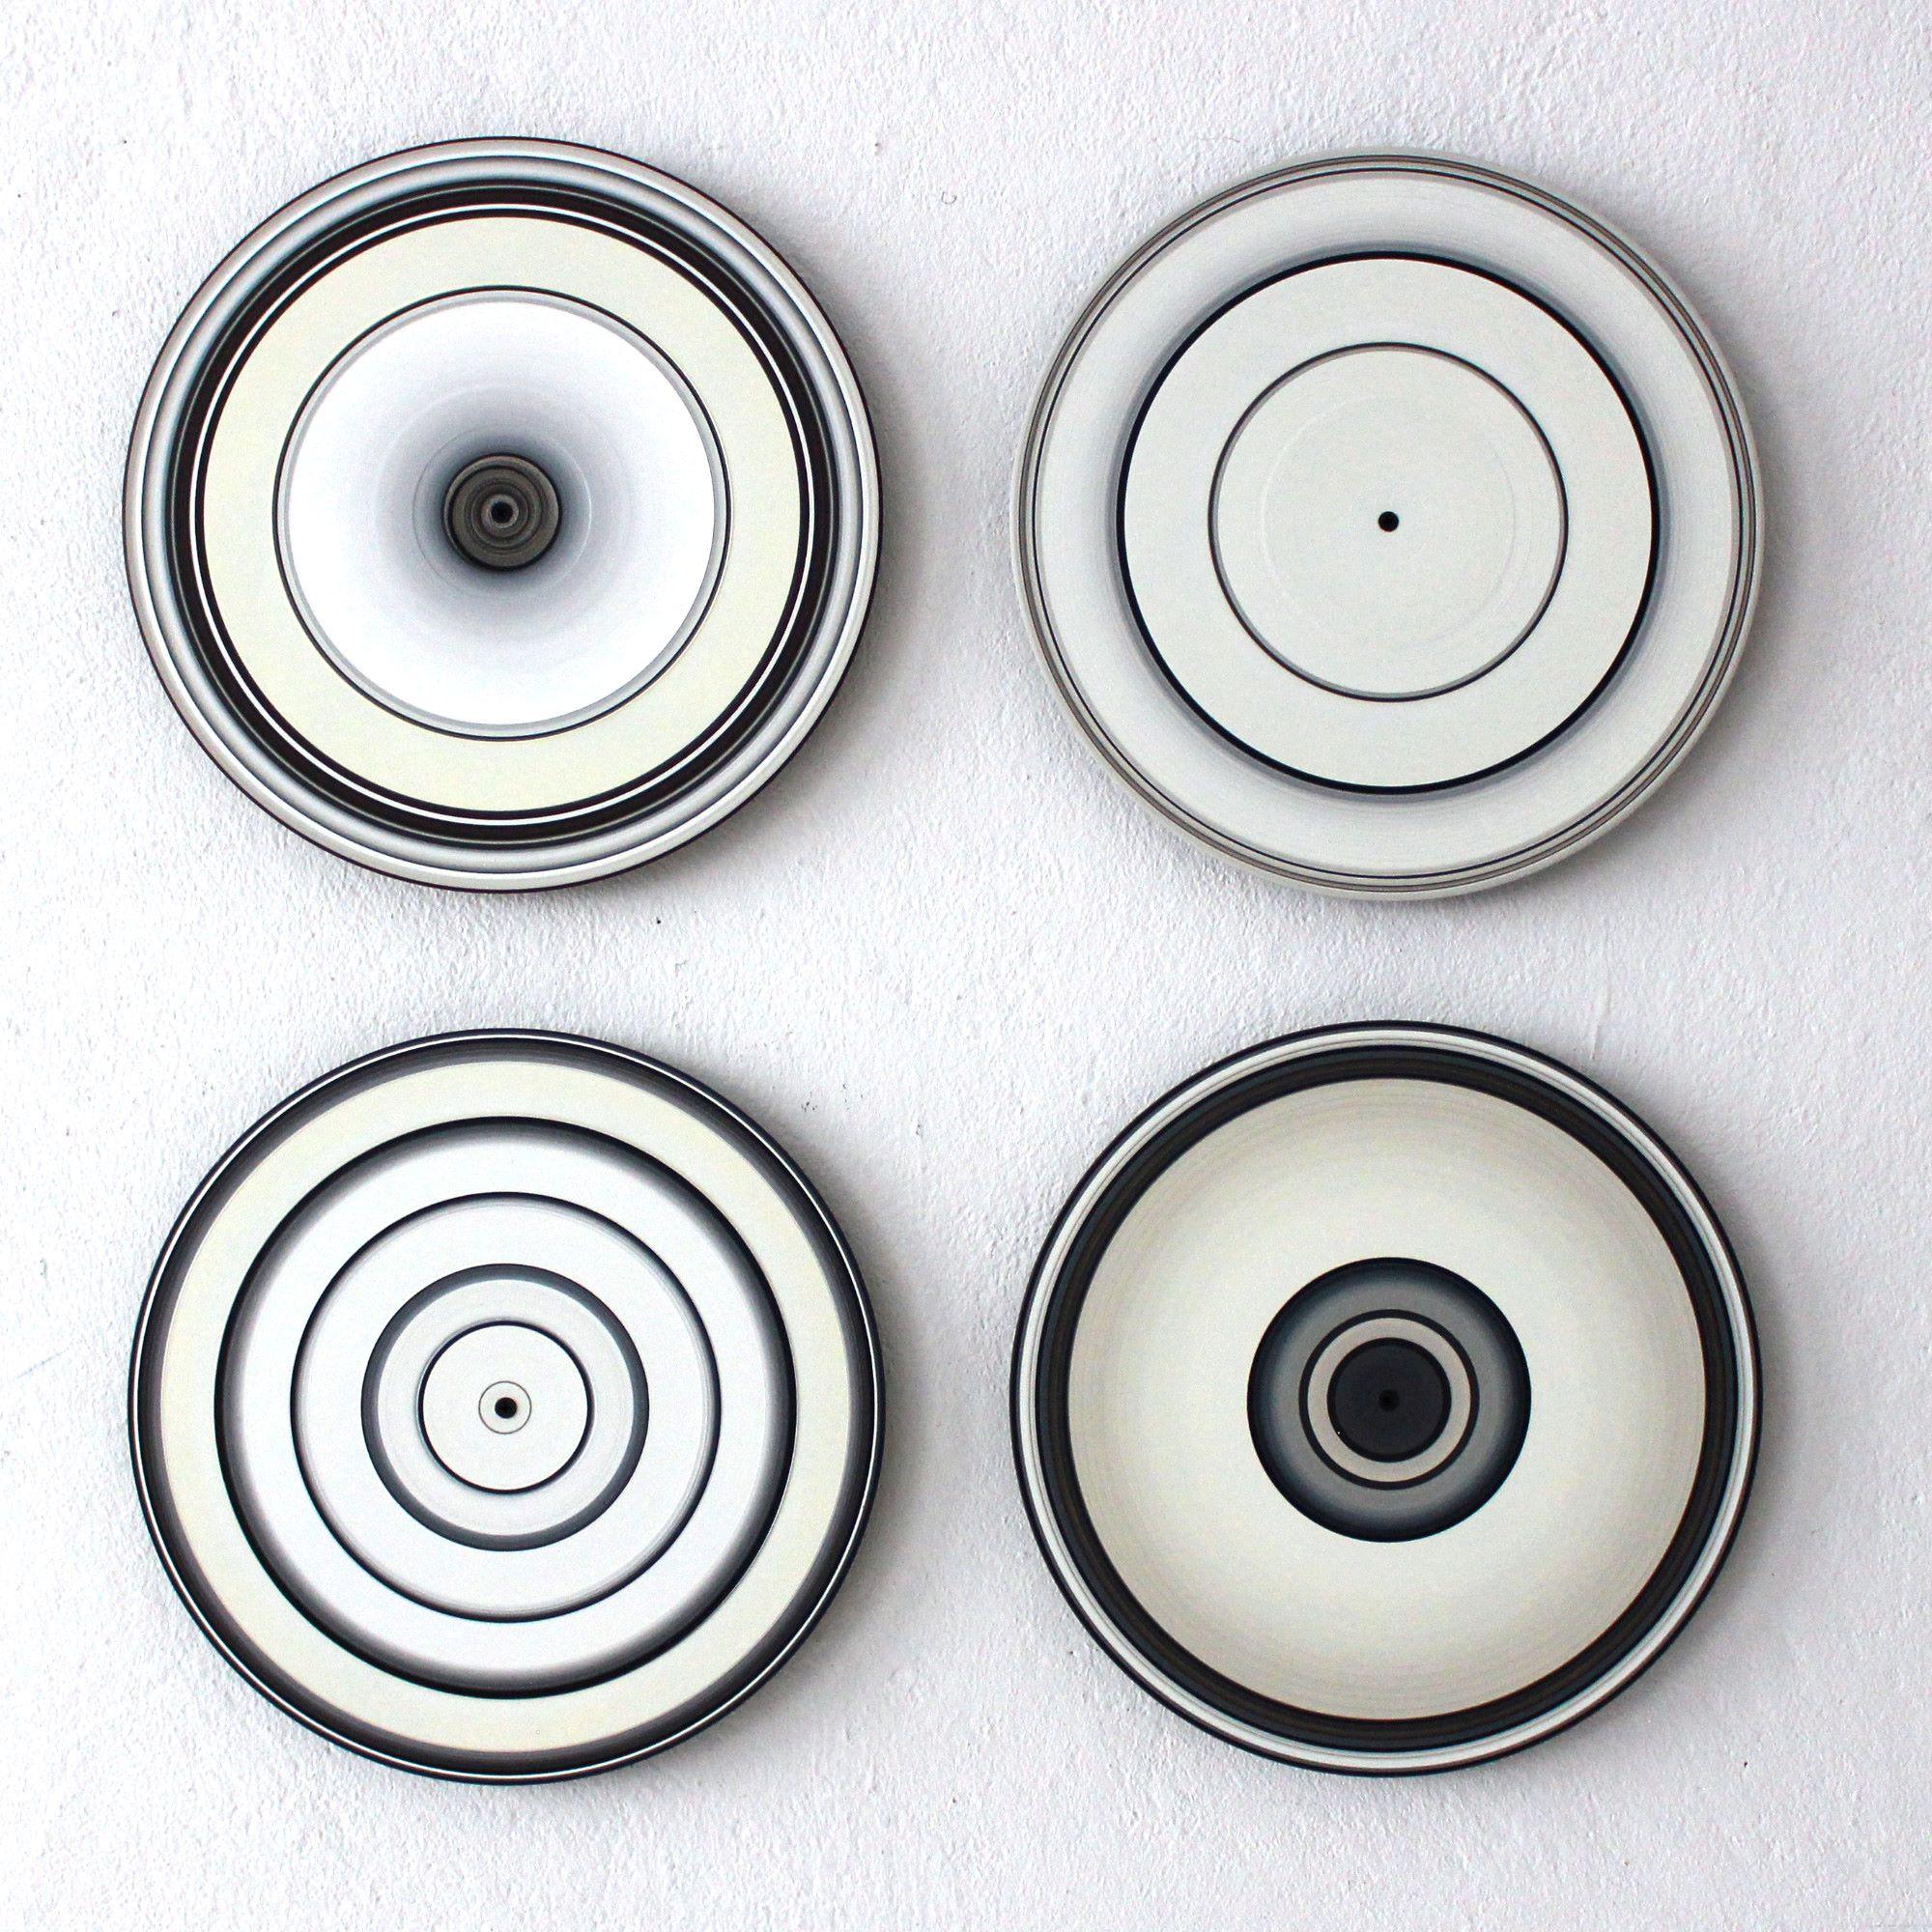 SOUND AND VISION – White Quartett is a unique oil on vinyl installation by German contemporary artist Doris Marten, dimensions are 65 × 65 cm (25.6 × 25.6 in). Every piece is 30 cm in diameter (11.8 in).
The artwork is signed, sold unframed and